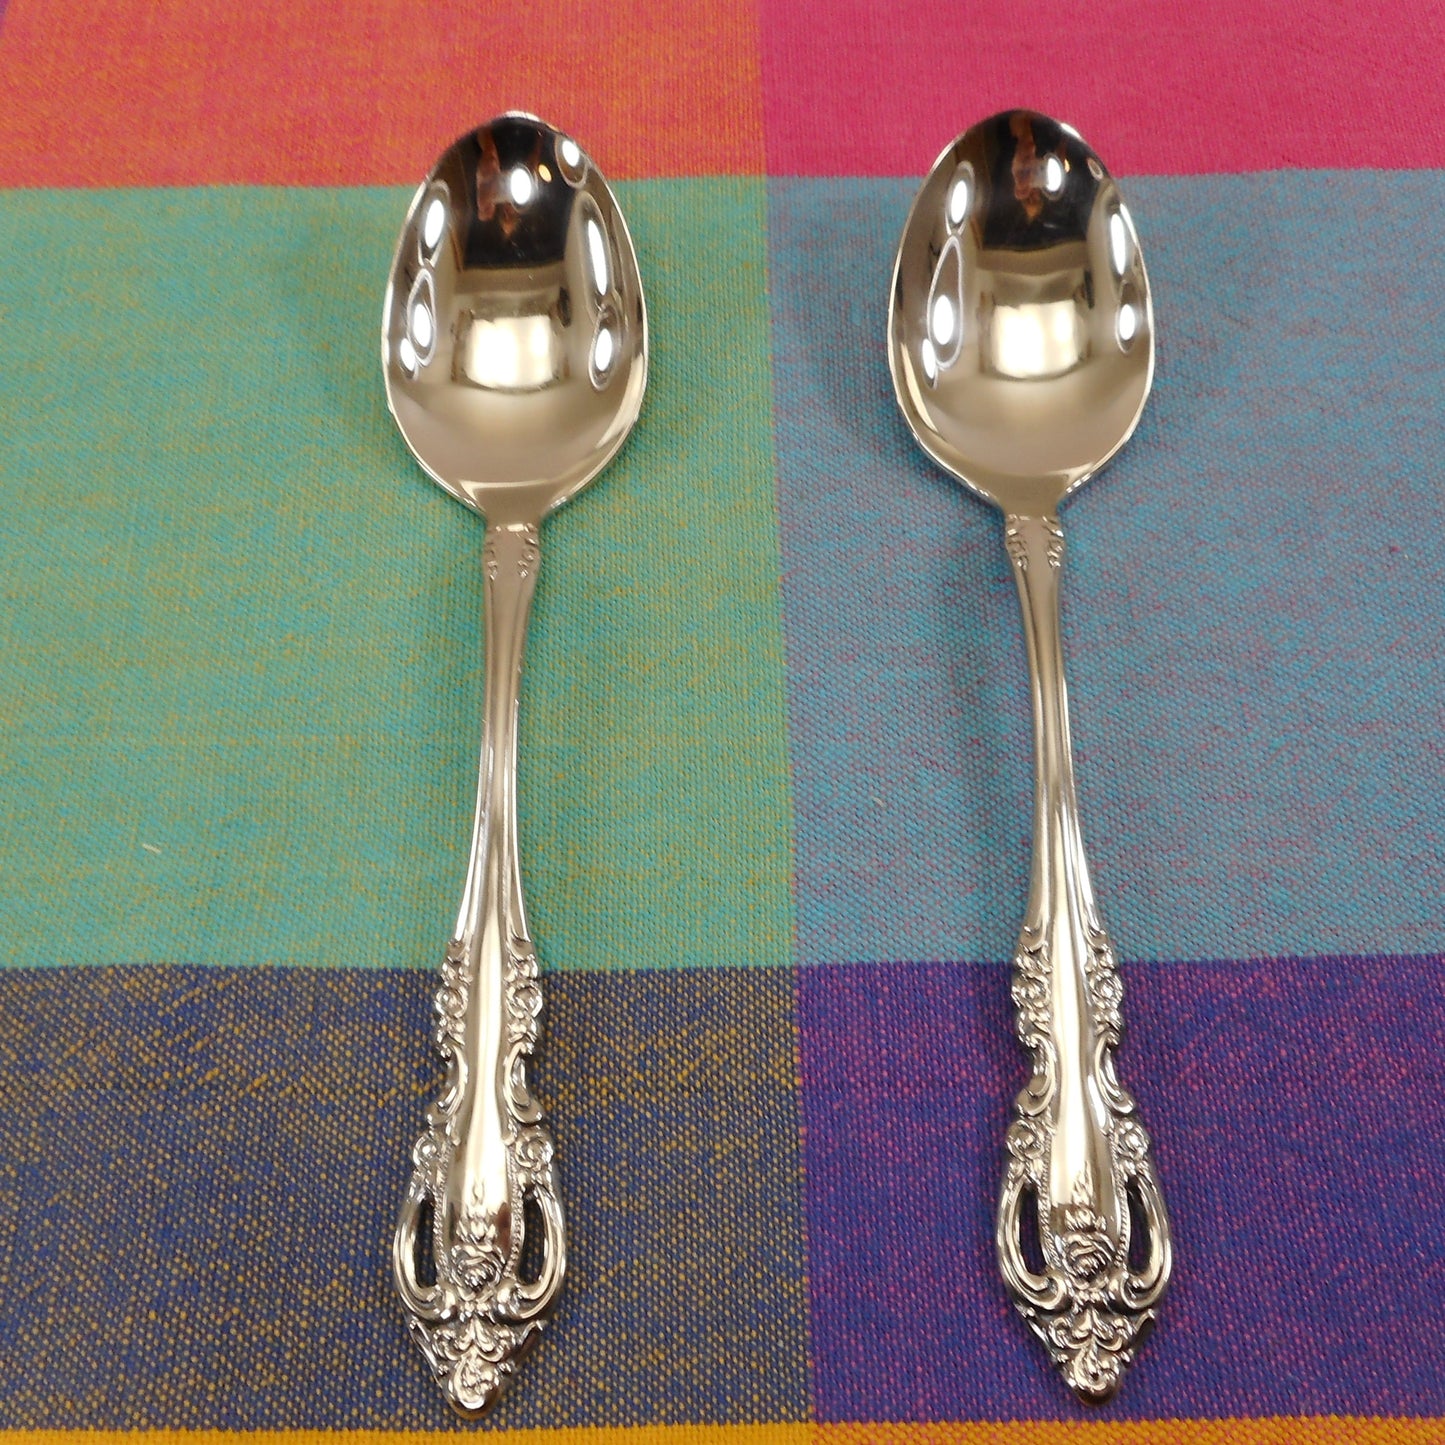 Oneida Community Brahms Stainless Flatware - 2 Place Spoons